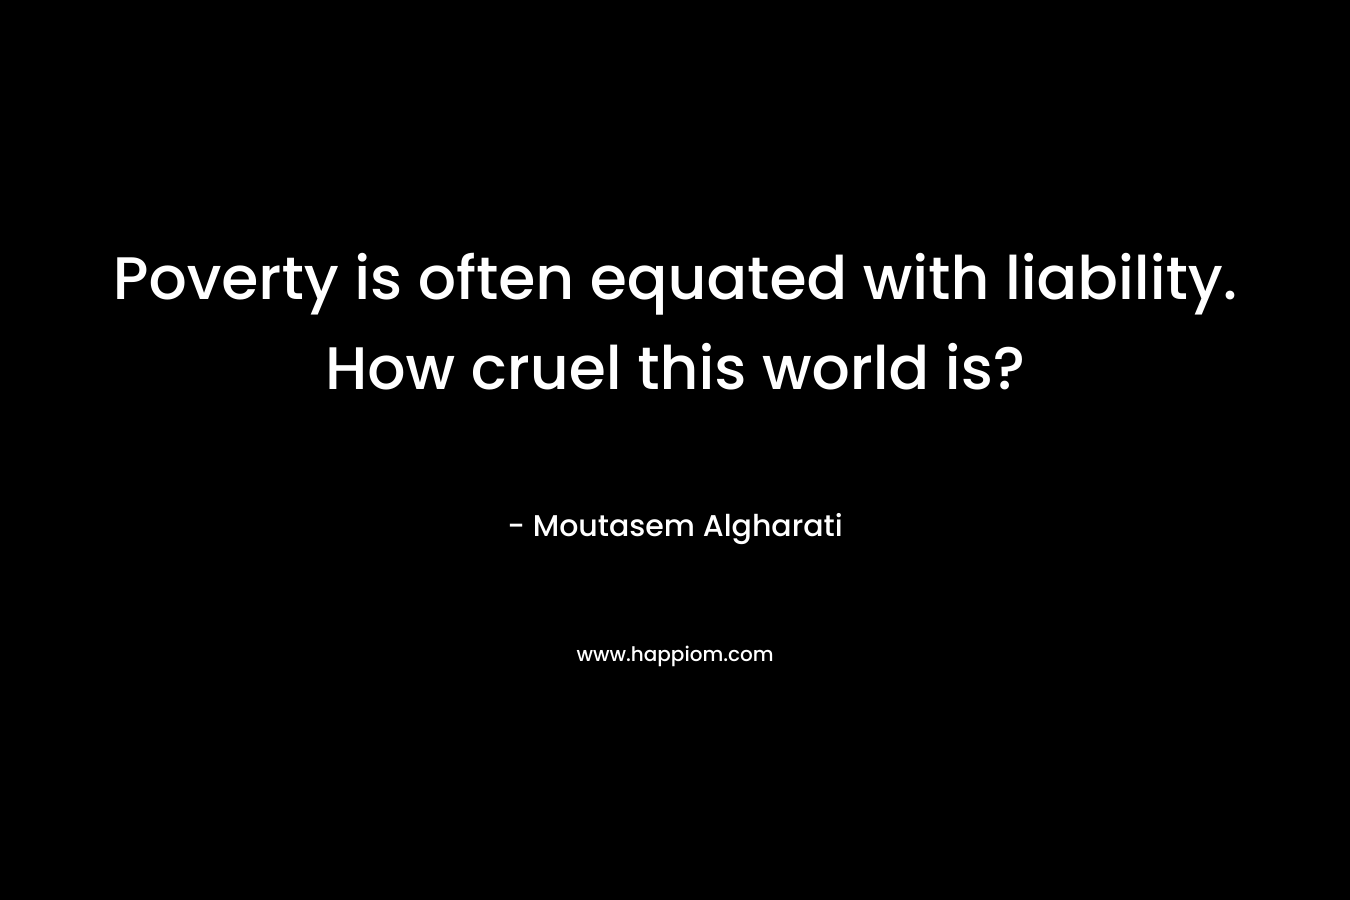 Poverty is often equated with liability. How cruel this world is?